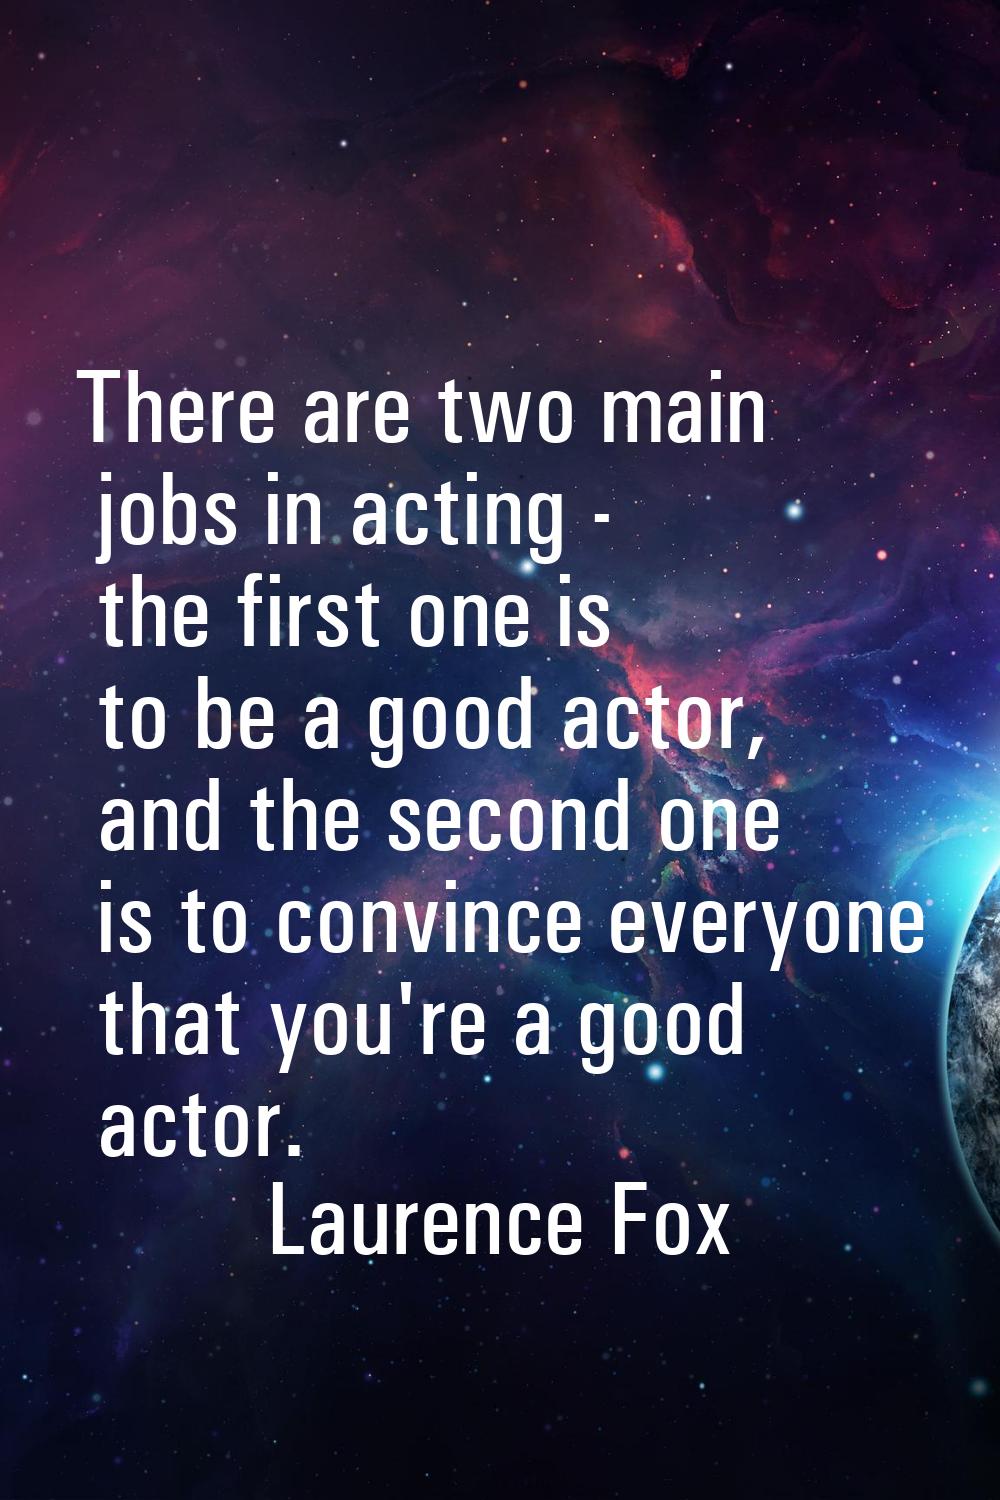 There are two main jobs in acting - the first one is to be a good actor, and the second one is to c